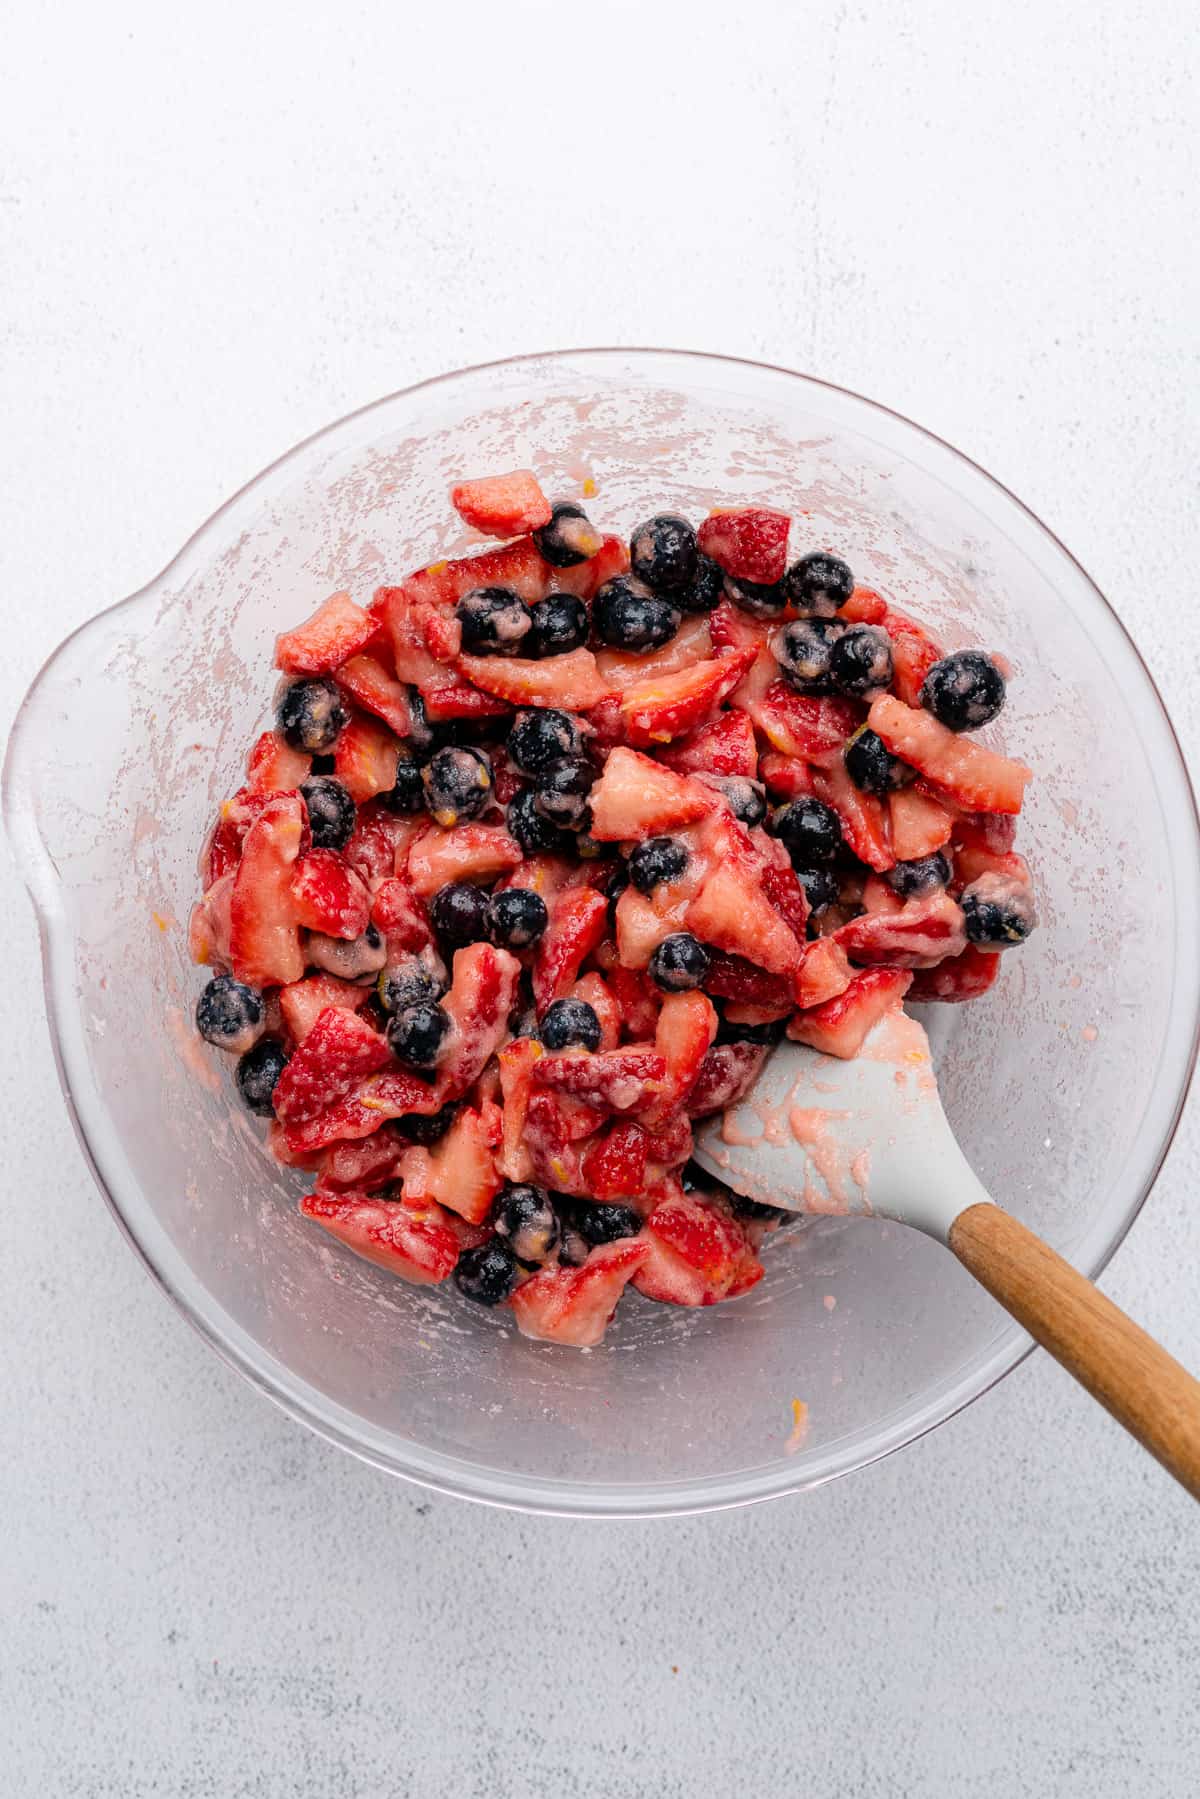 berries tossed with thickeners and sweetener to go into a low carb strawberry blueberry pie